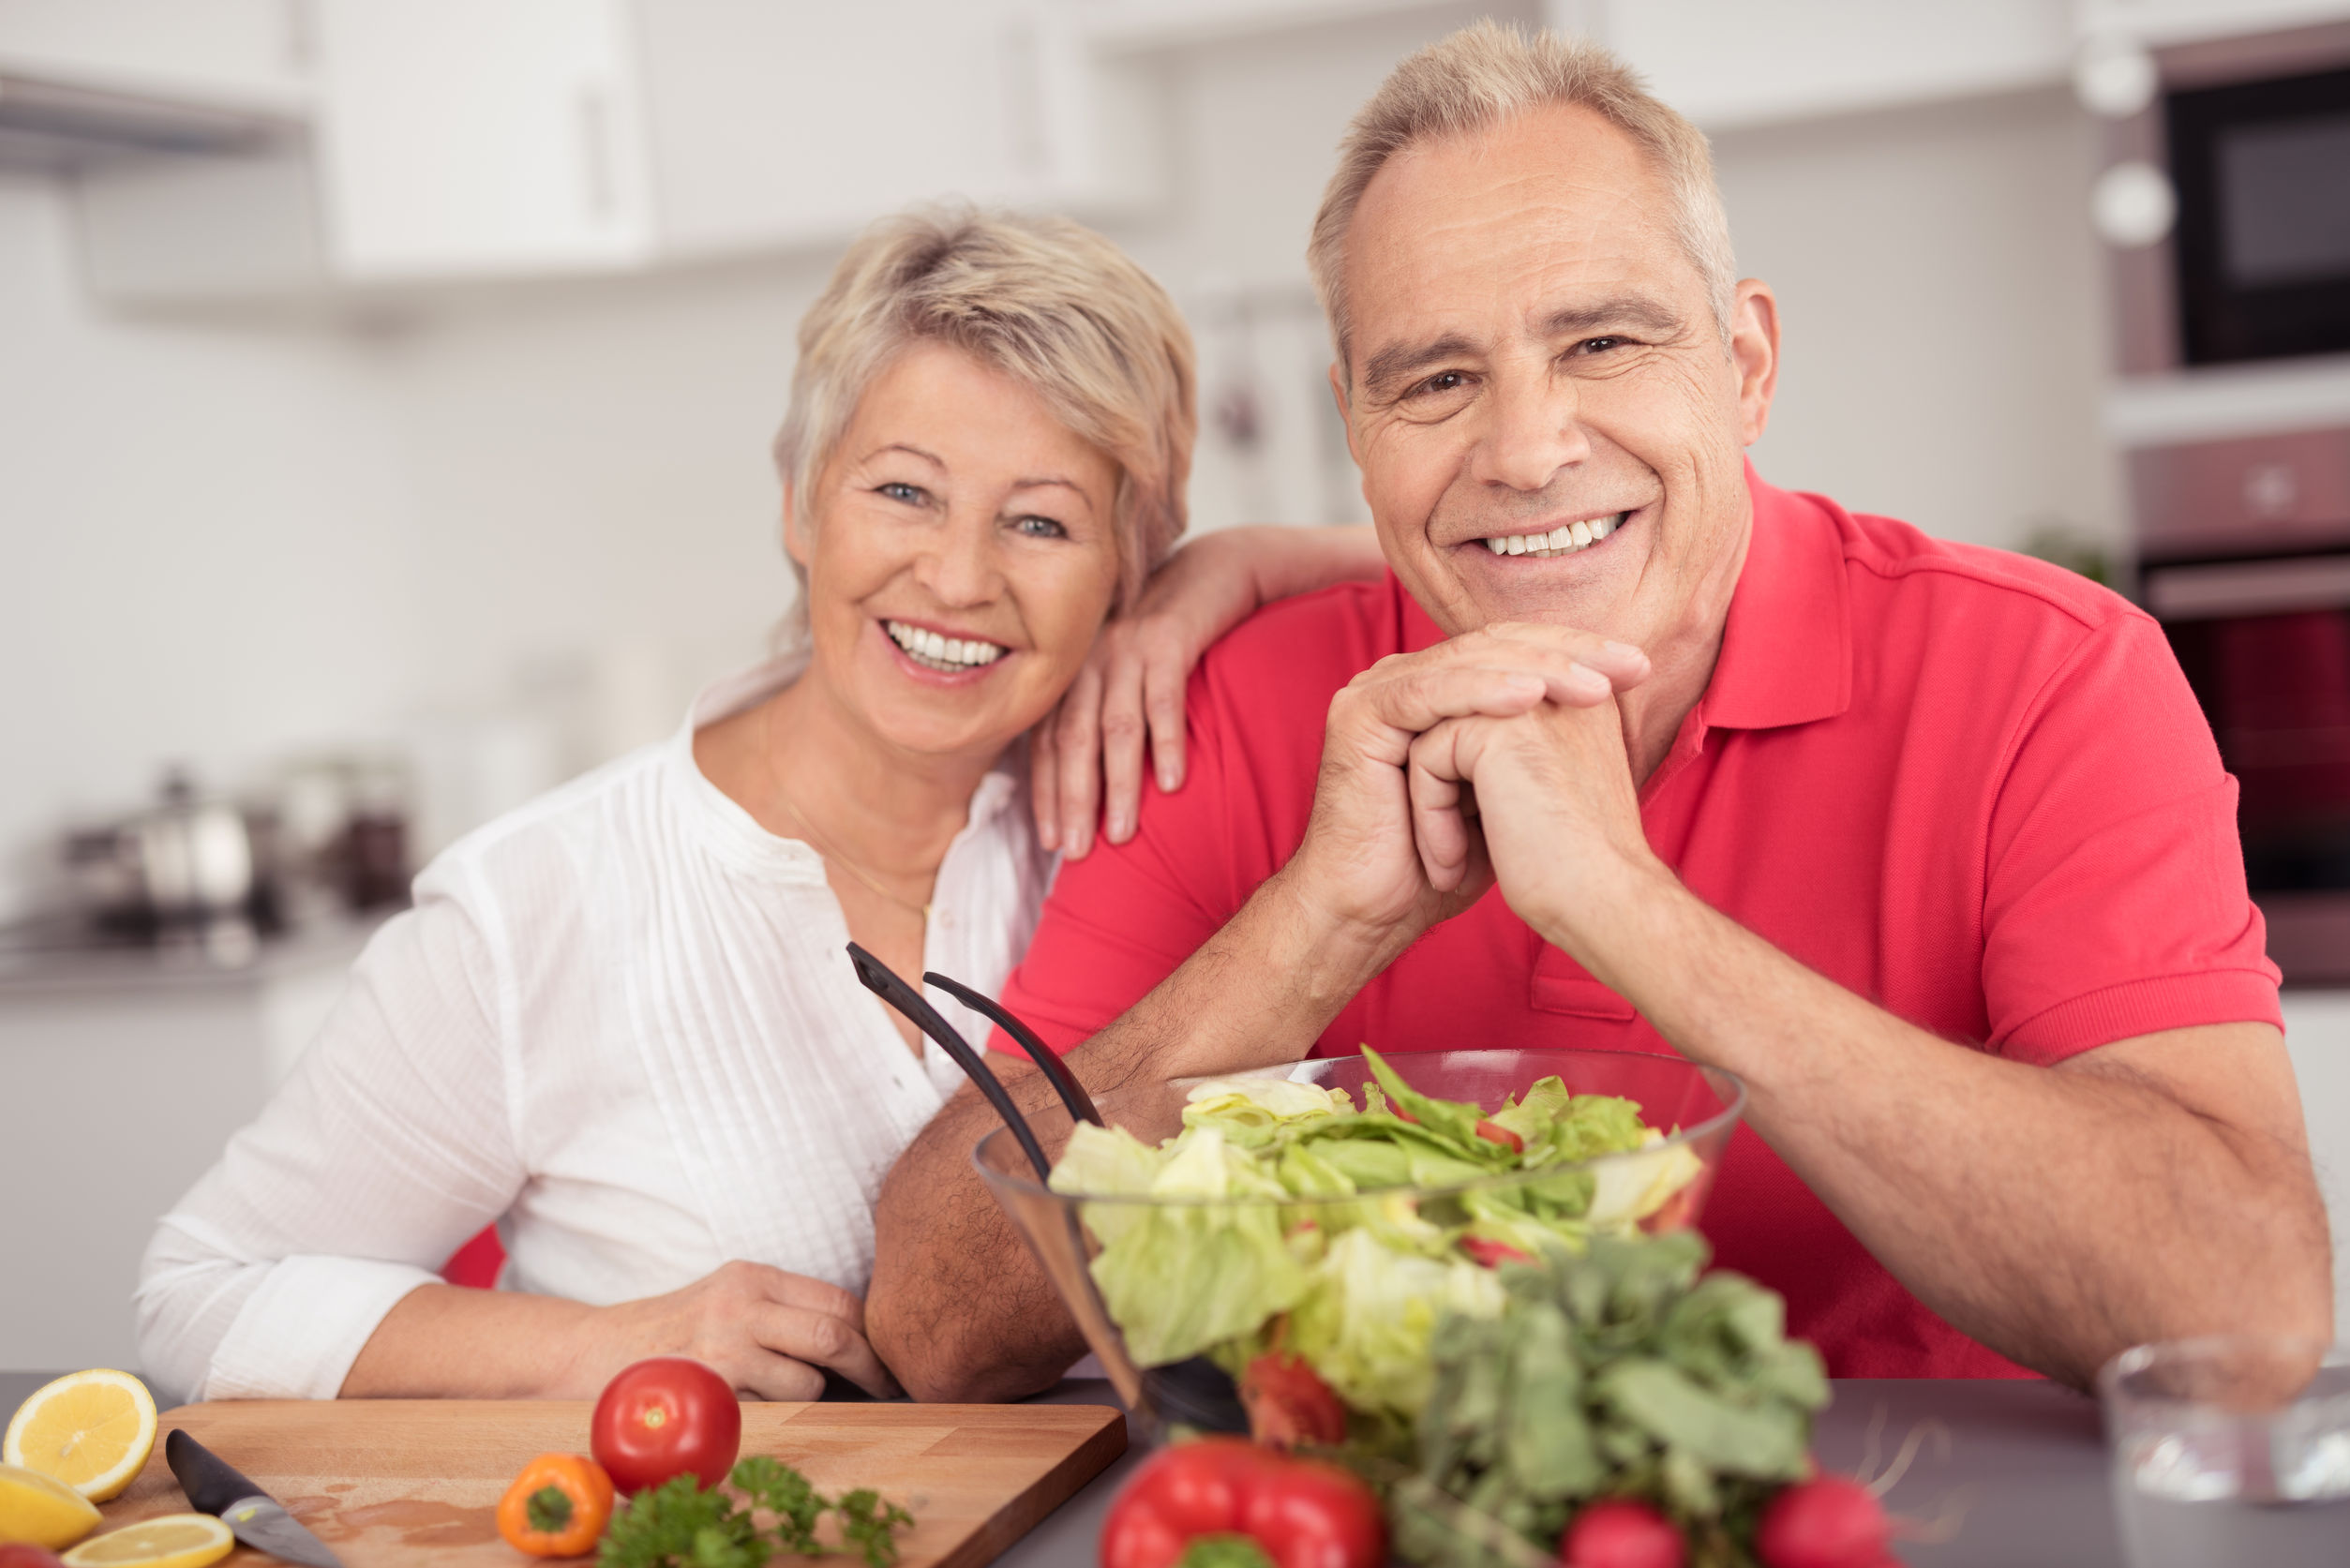 Portrait of a Happy Senior Couple Sitting at the Kitchen Table with a Bowl of Fresh Salad, Smiling at the Camera.